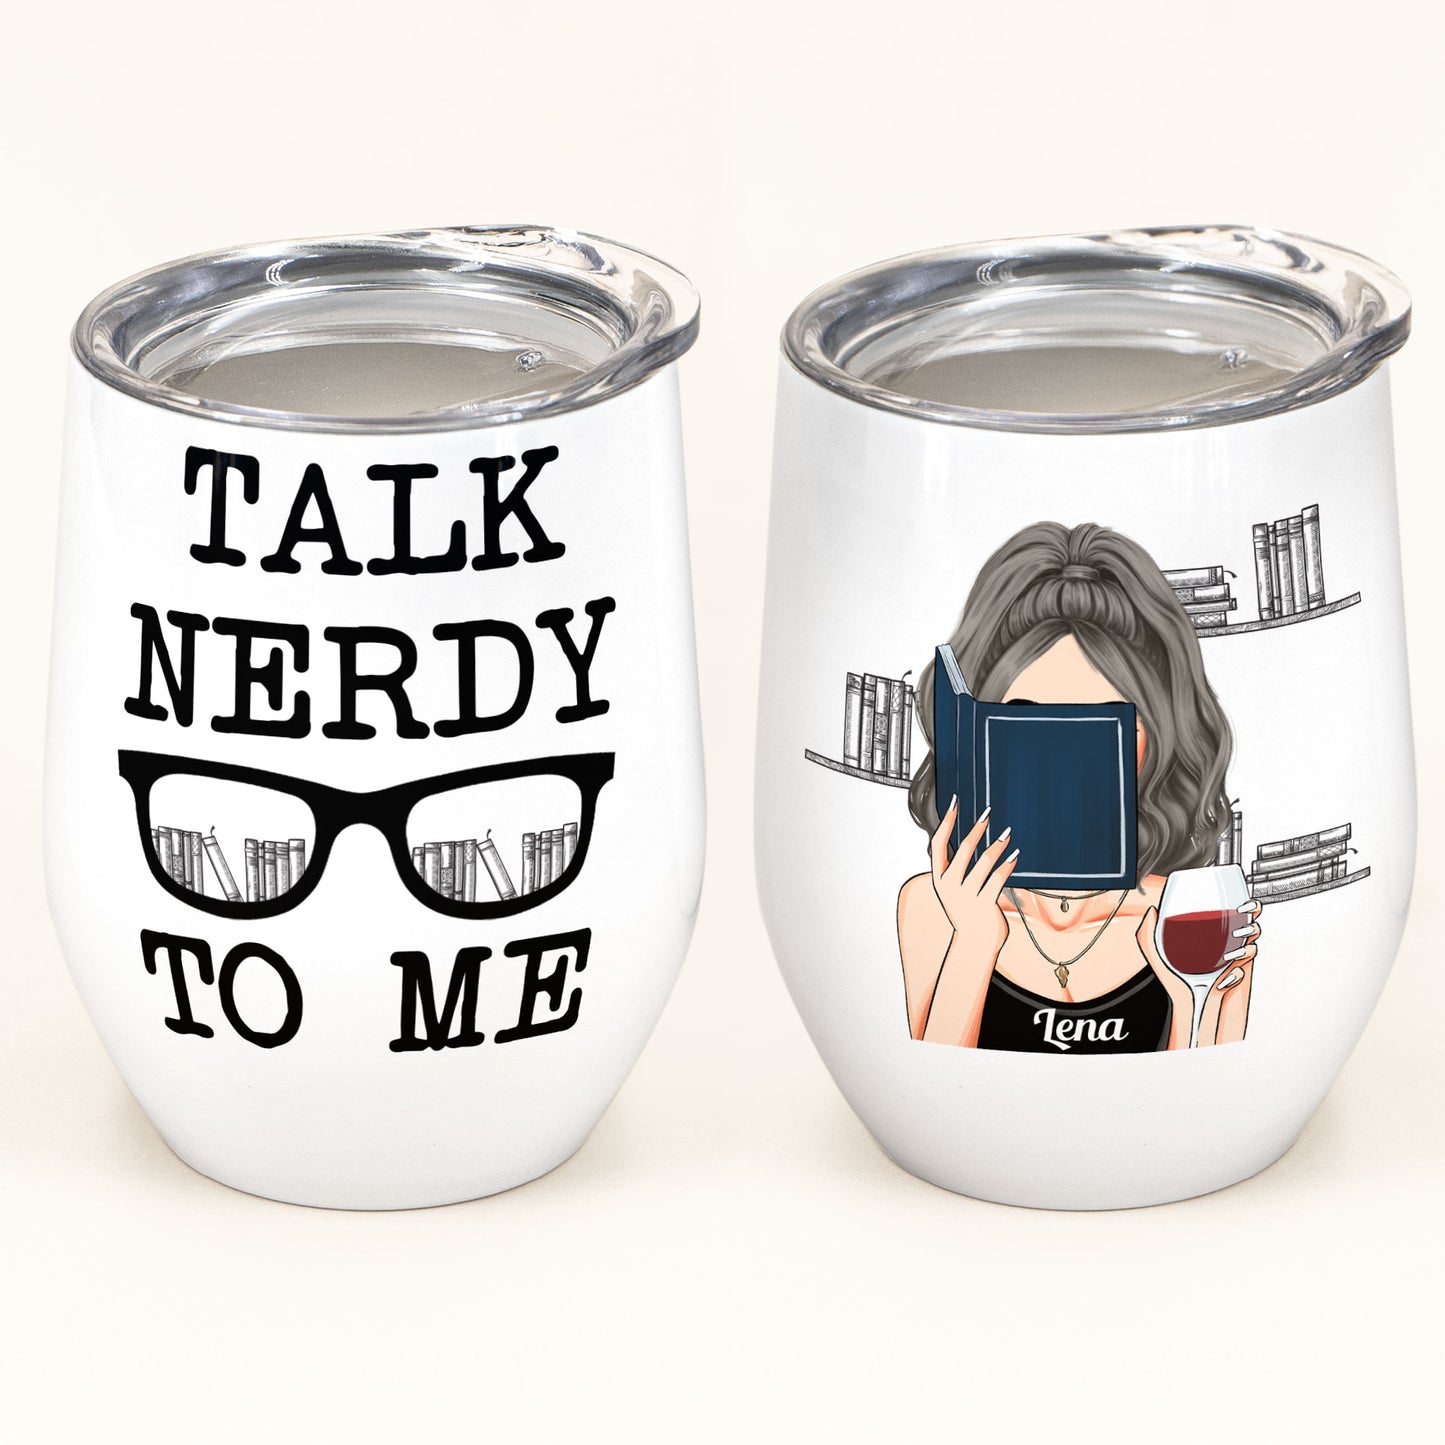 Talk Nerdy To Me - Personalized Wine Tumbler - Birthday Gift For Book Lovers, Bookworm